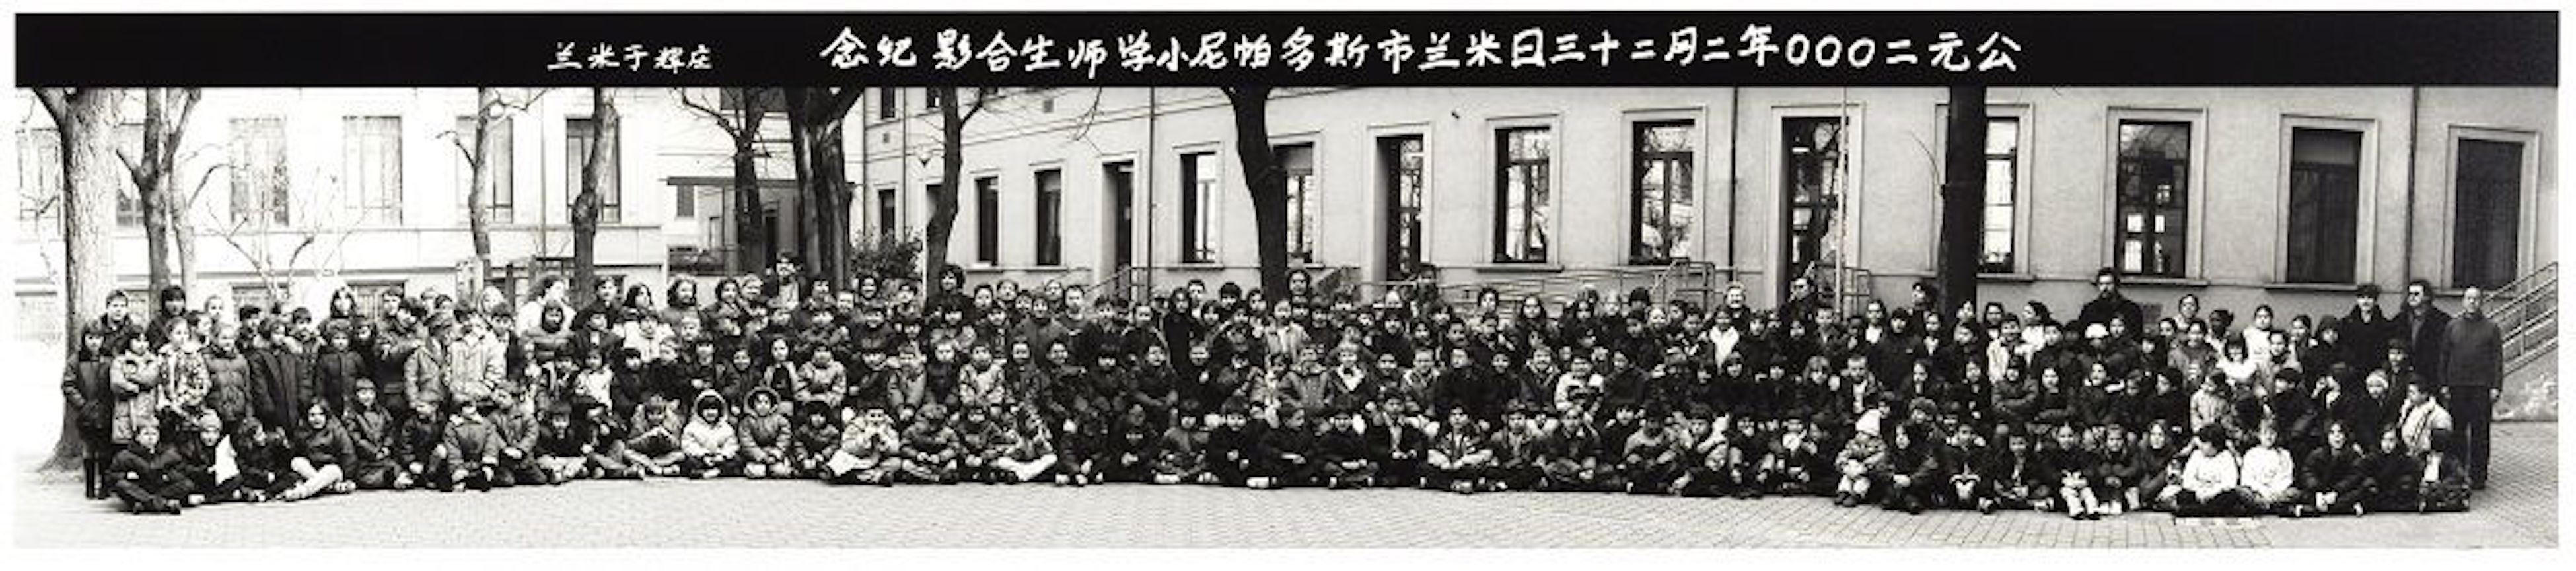 23 February 2000 Stoppani Elementary School is a beautiful black and white photograph, realized by Zhuang Hui in 2000

Silver gelatin print.

Very good conditions.

Reference:

- Zhuang Hui/Luo Yongjin, Identità perdute

- Zhuang Hui/Luo Yongjin,